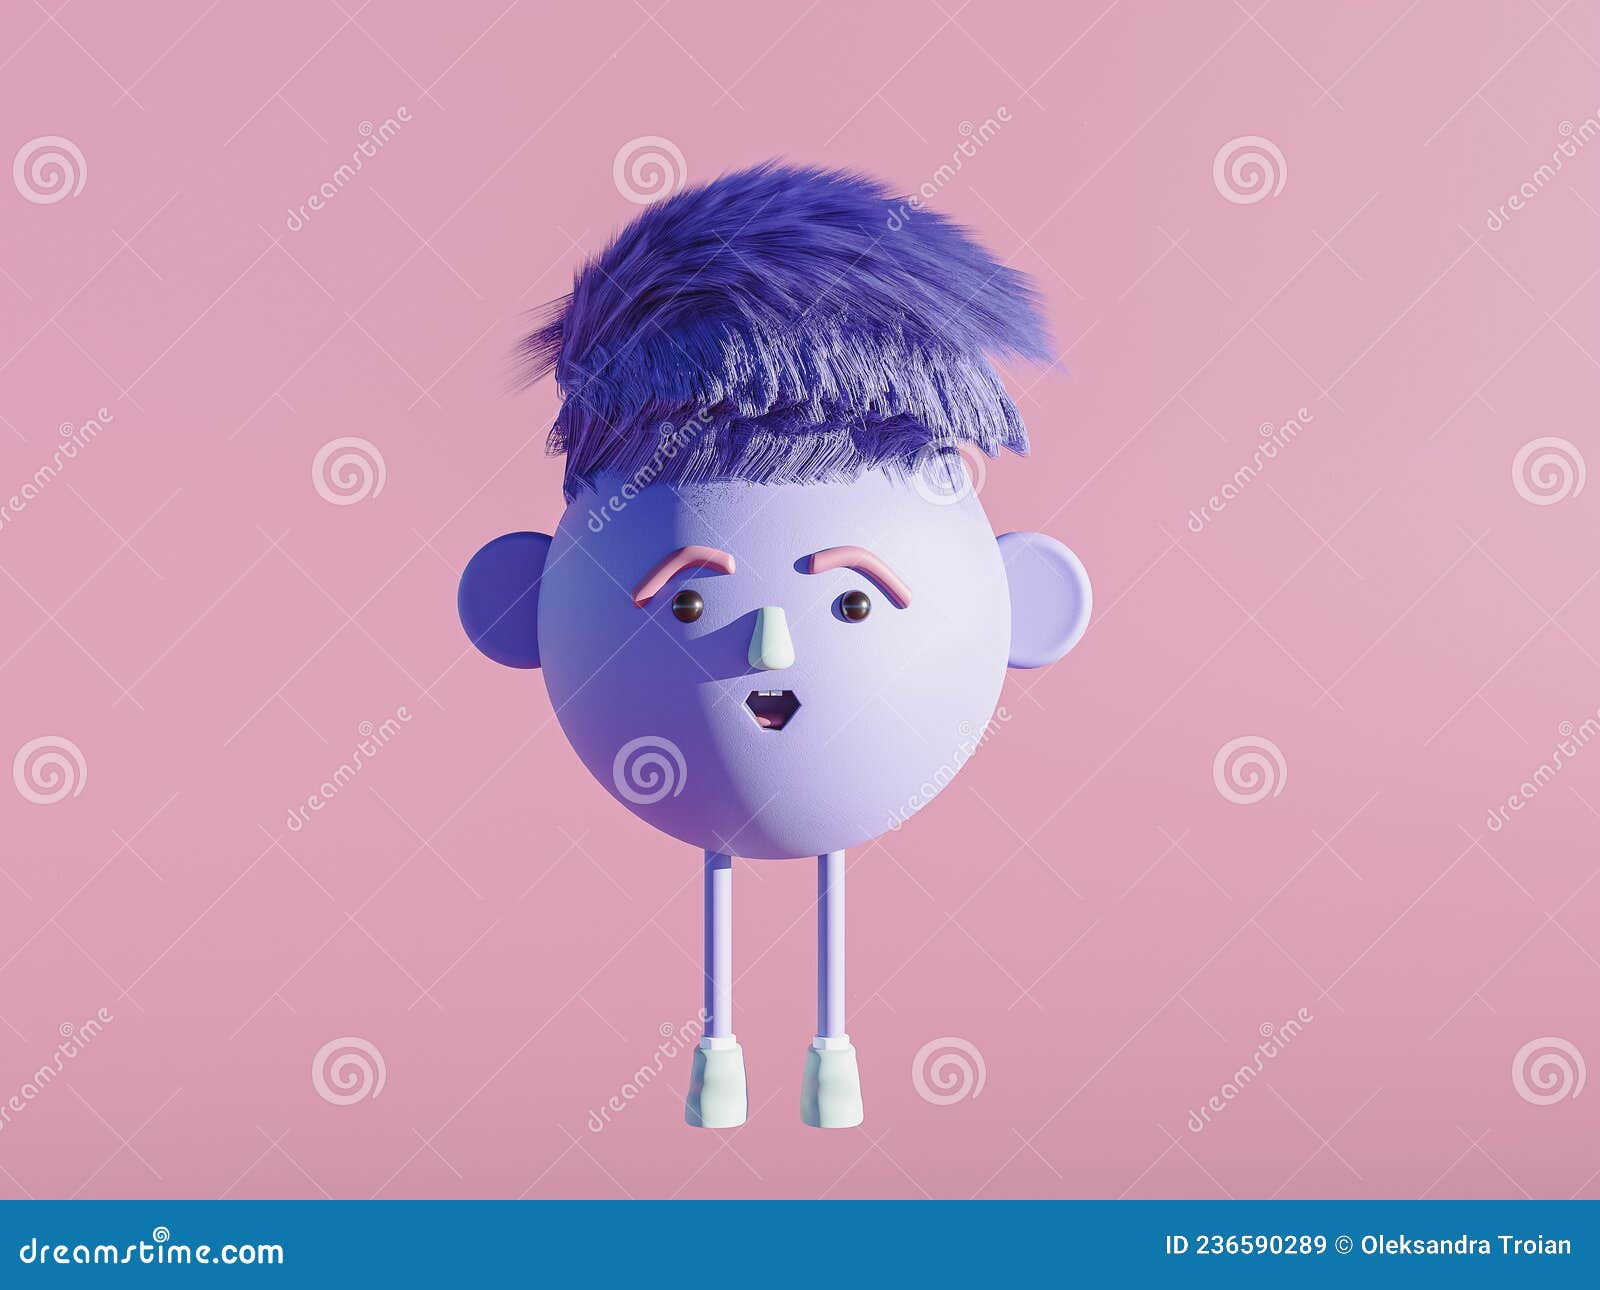 3d Render of Funny Cute Cartoon Character with Funny Hair Style. Socked or  Surprised Face Expression Stock Illustration - Illustration of humor,  cartoon: 236590289